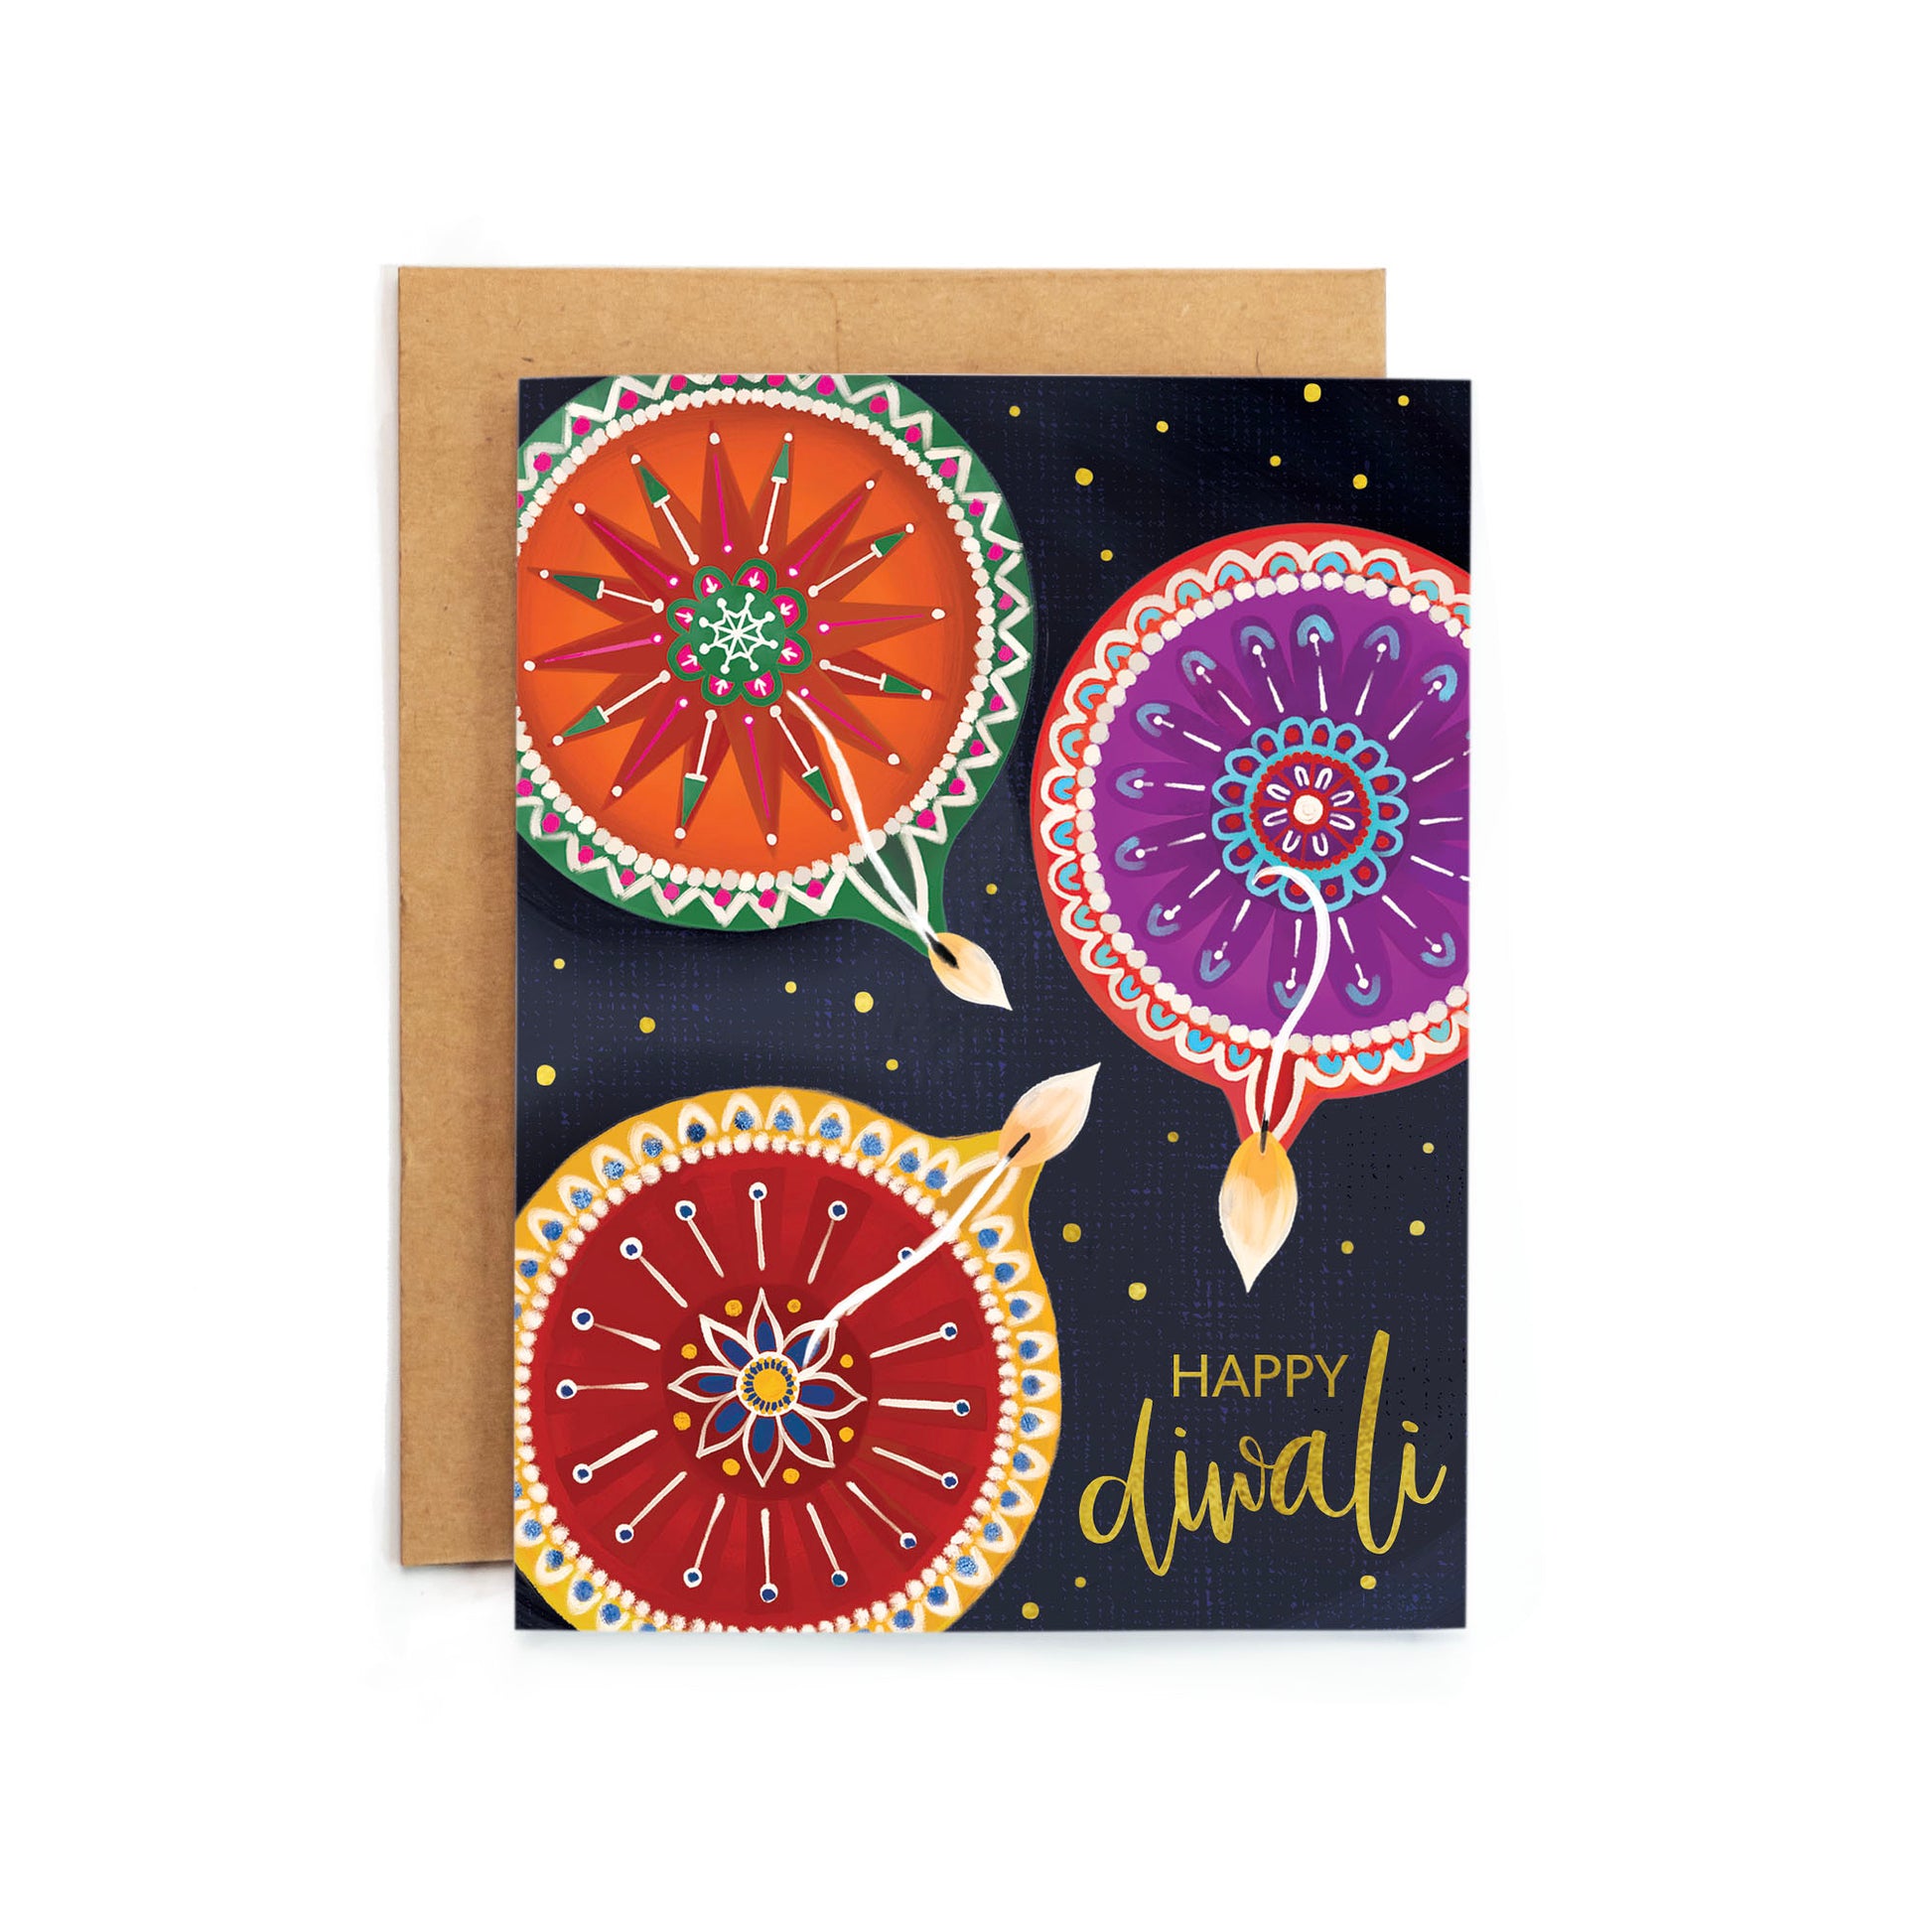 a happy diwali card with a colorful design